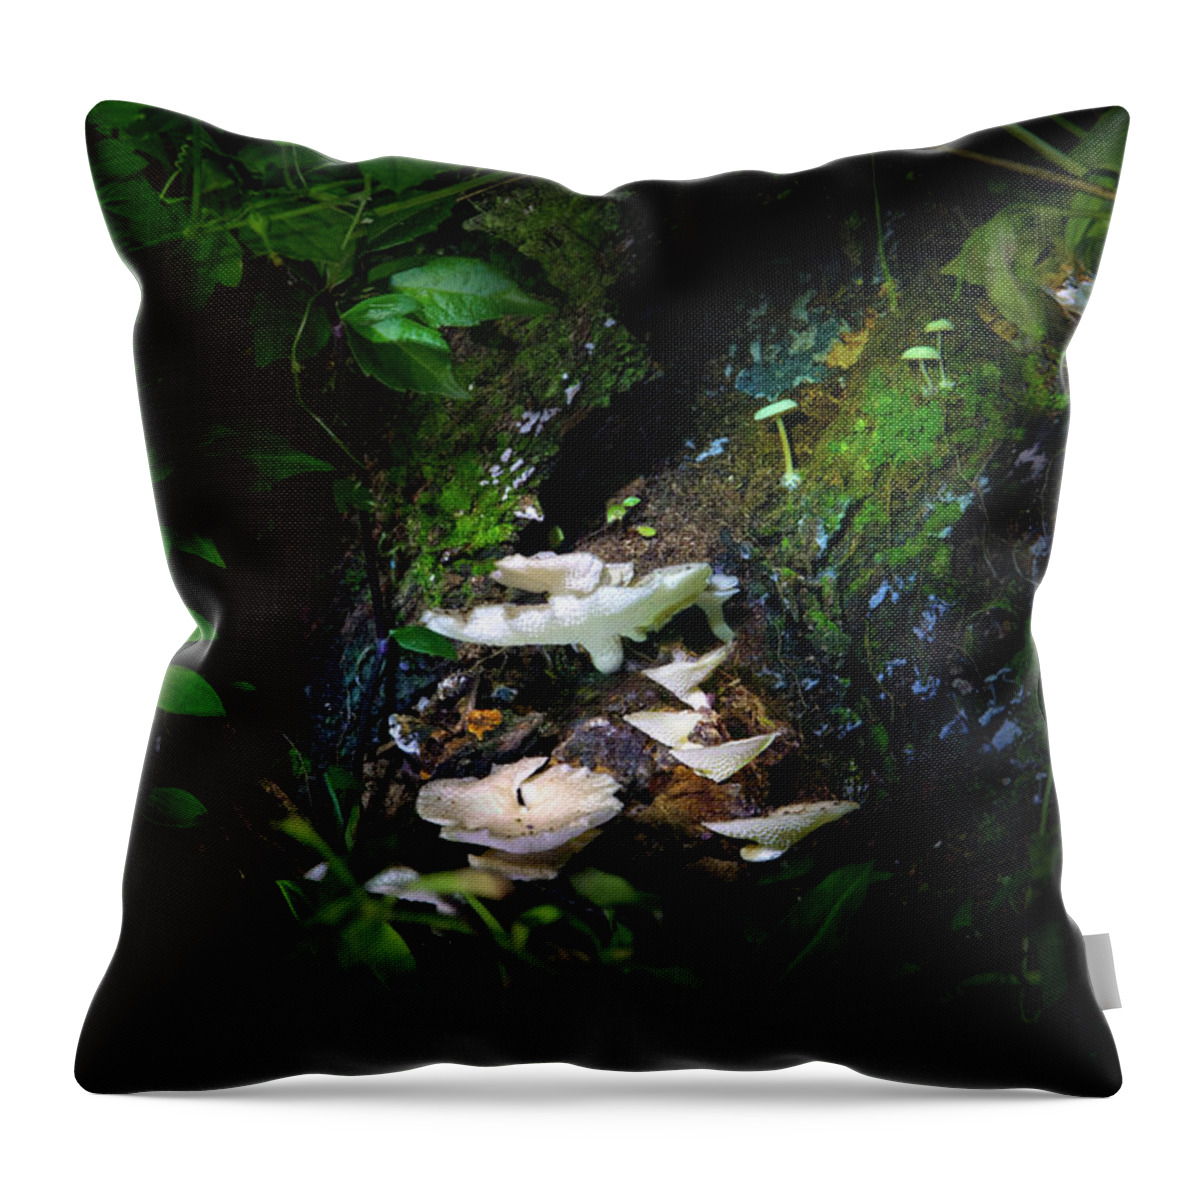 Mushrooms Throw Pillow featuring the photograph The Mushroom Grotto by Mark Andrew Thomas